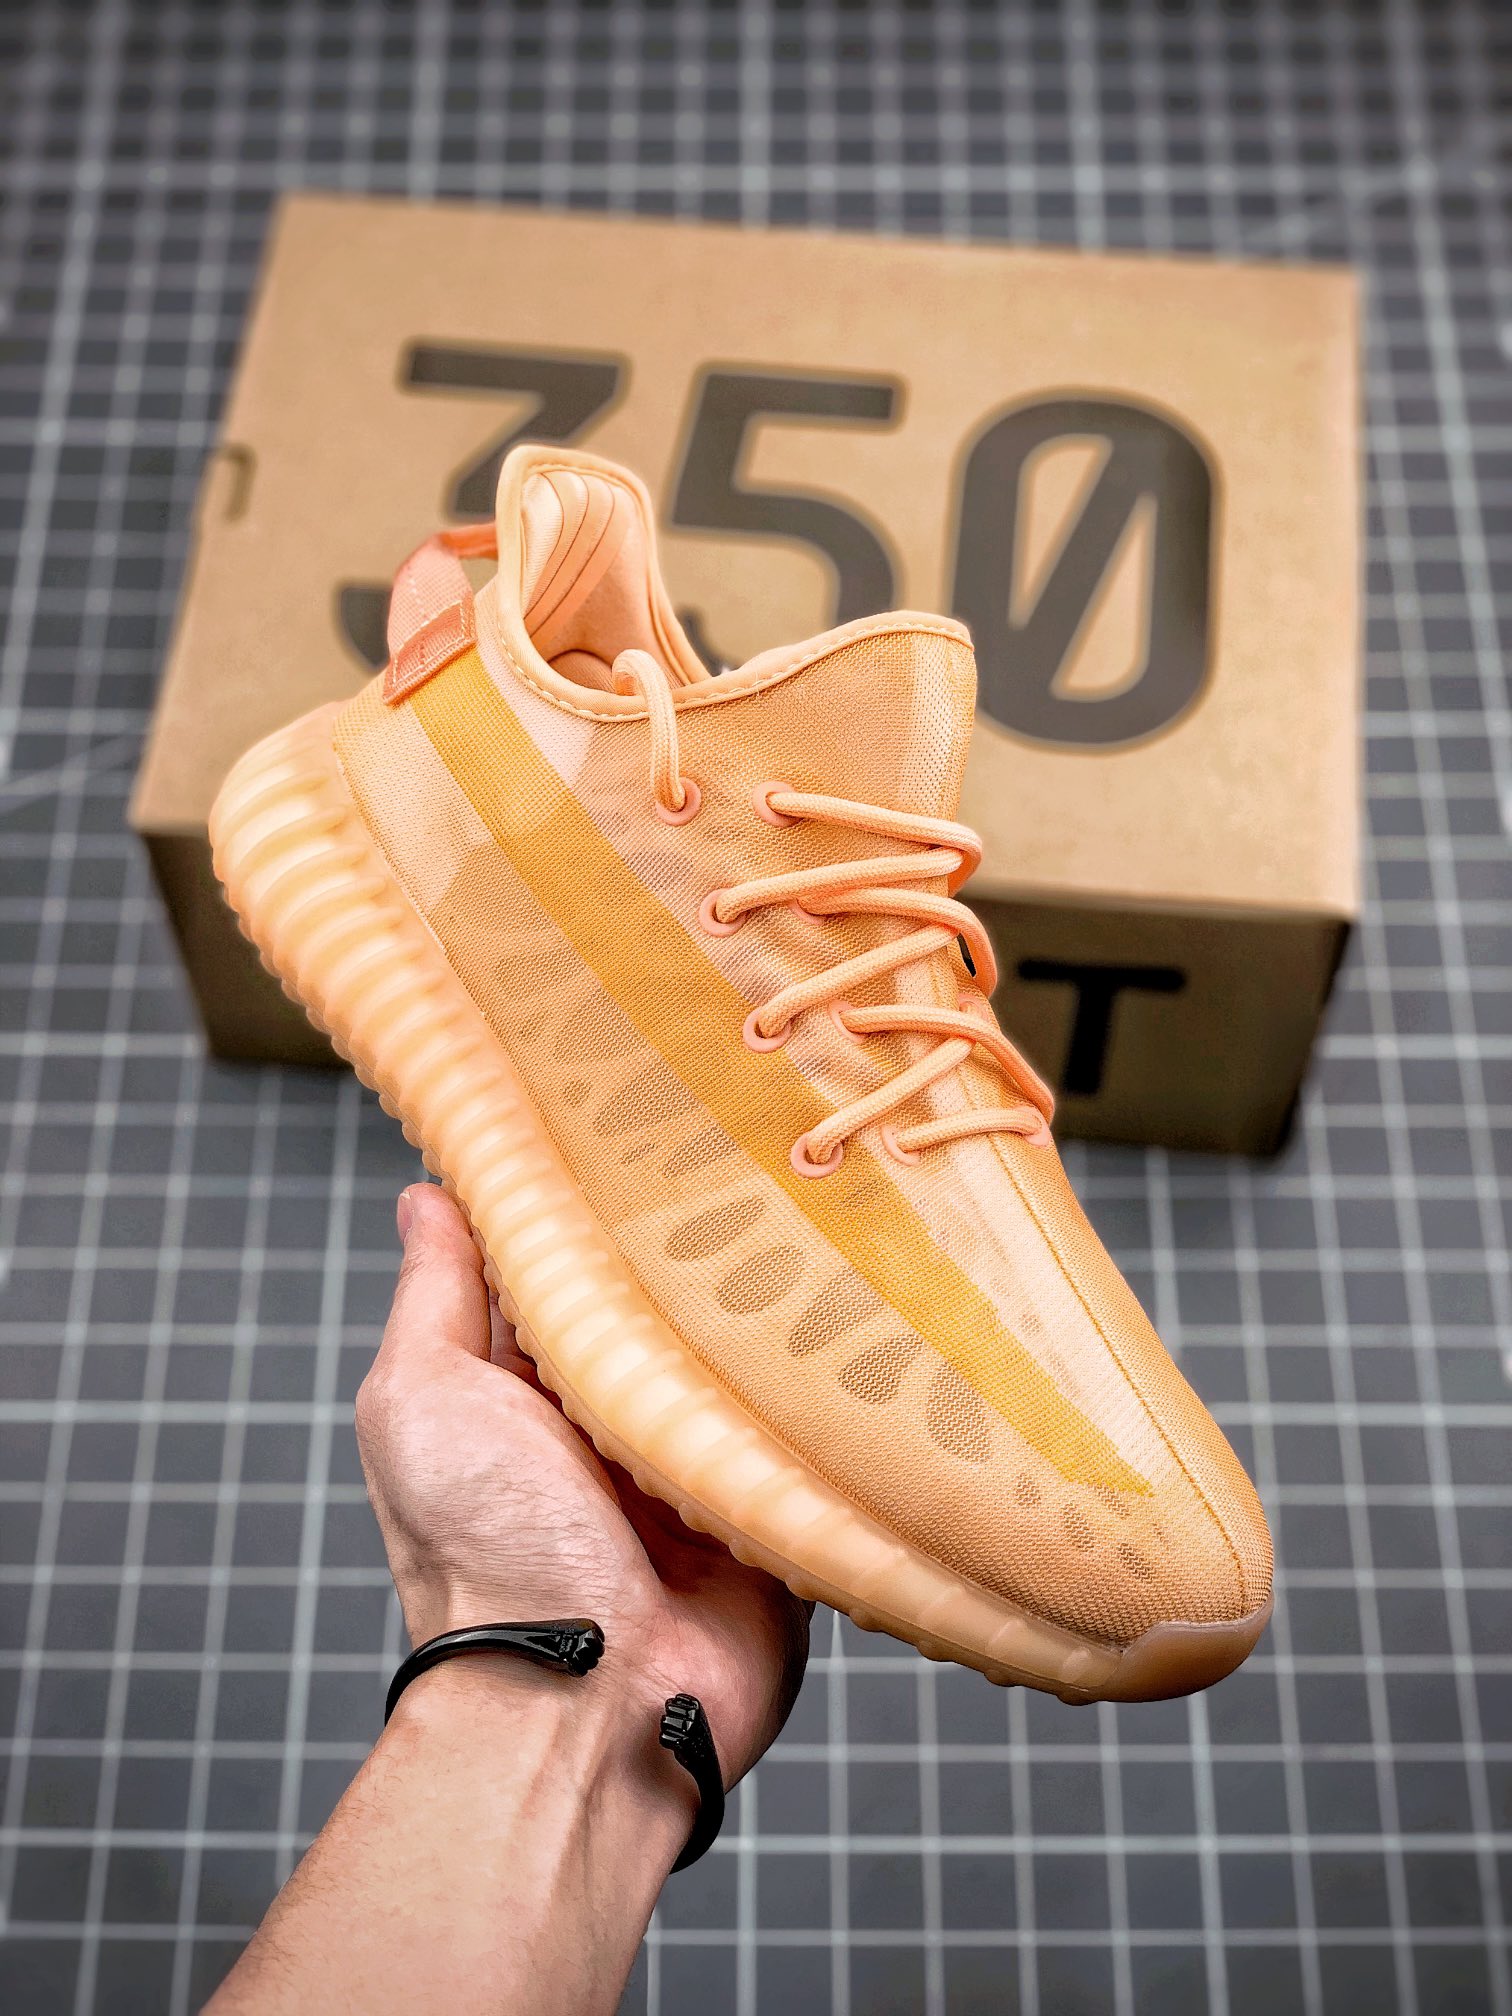 adidas Yeezy Boost 350 V2 Mono Clay For Sale – Sneaker Hello